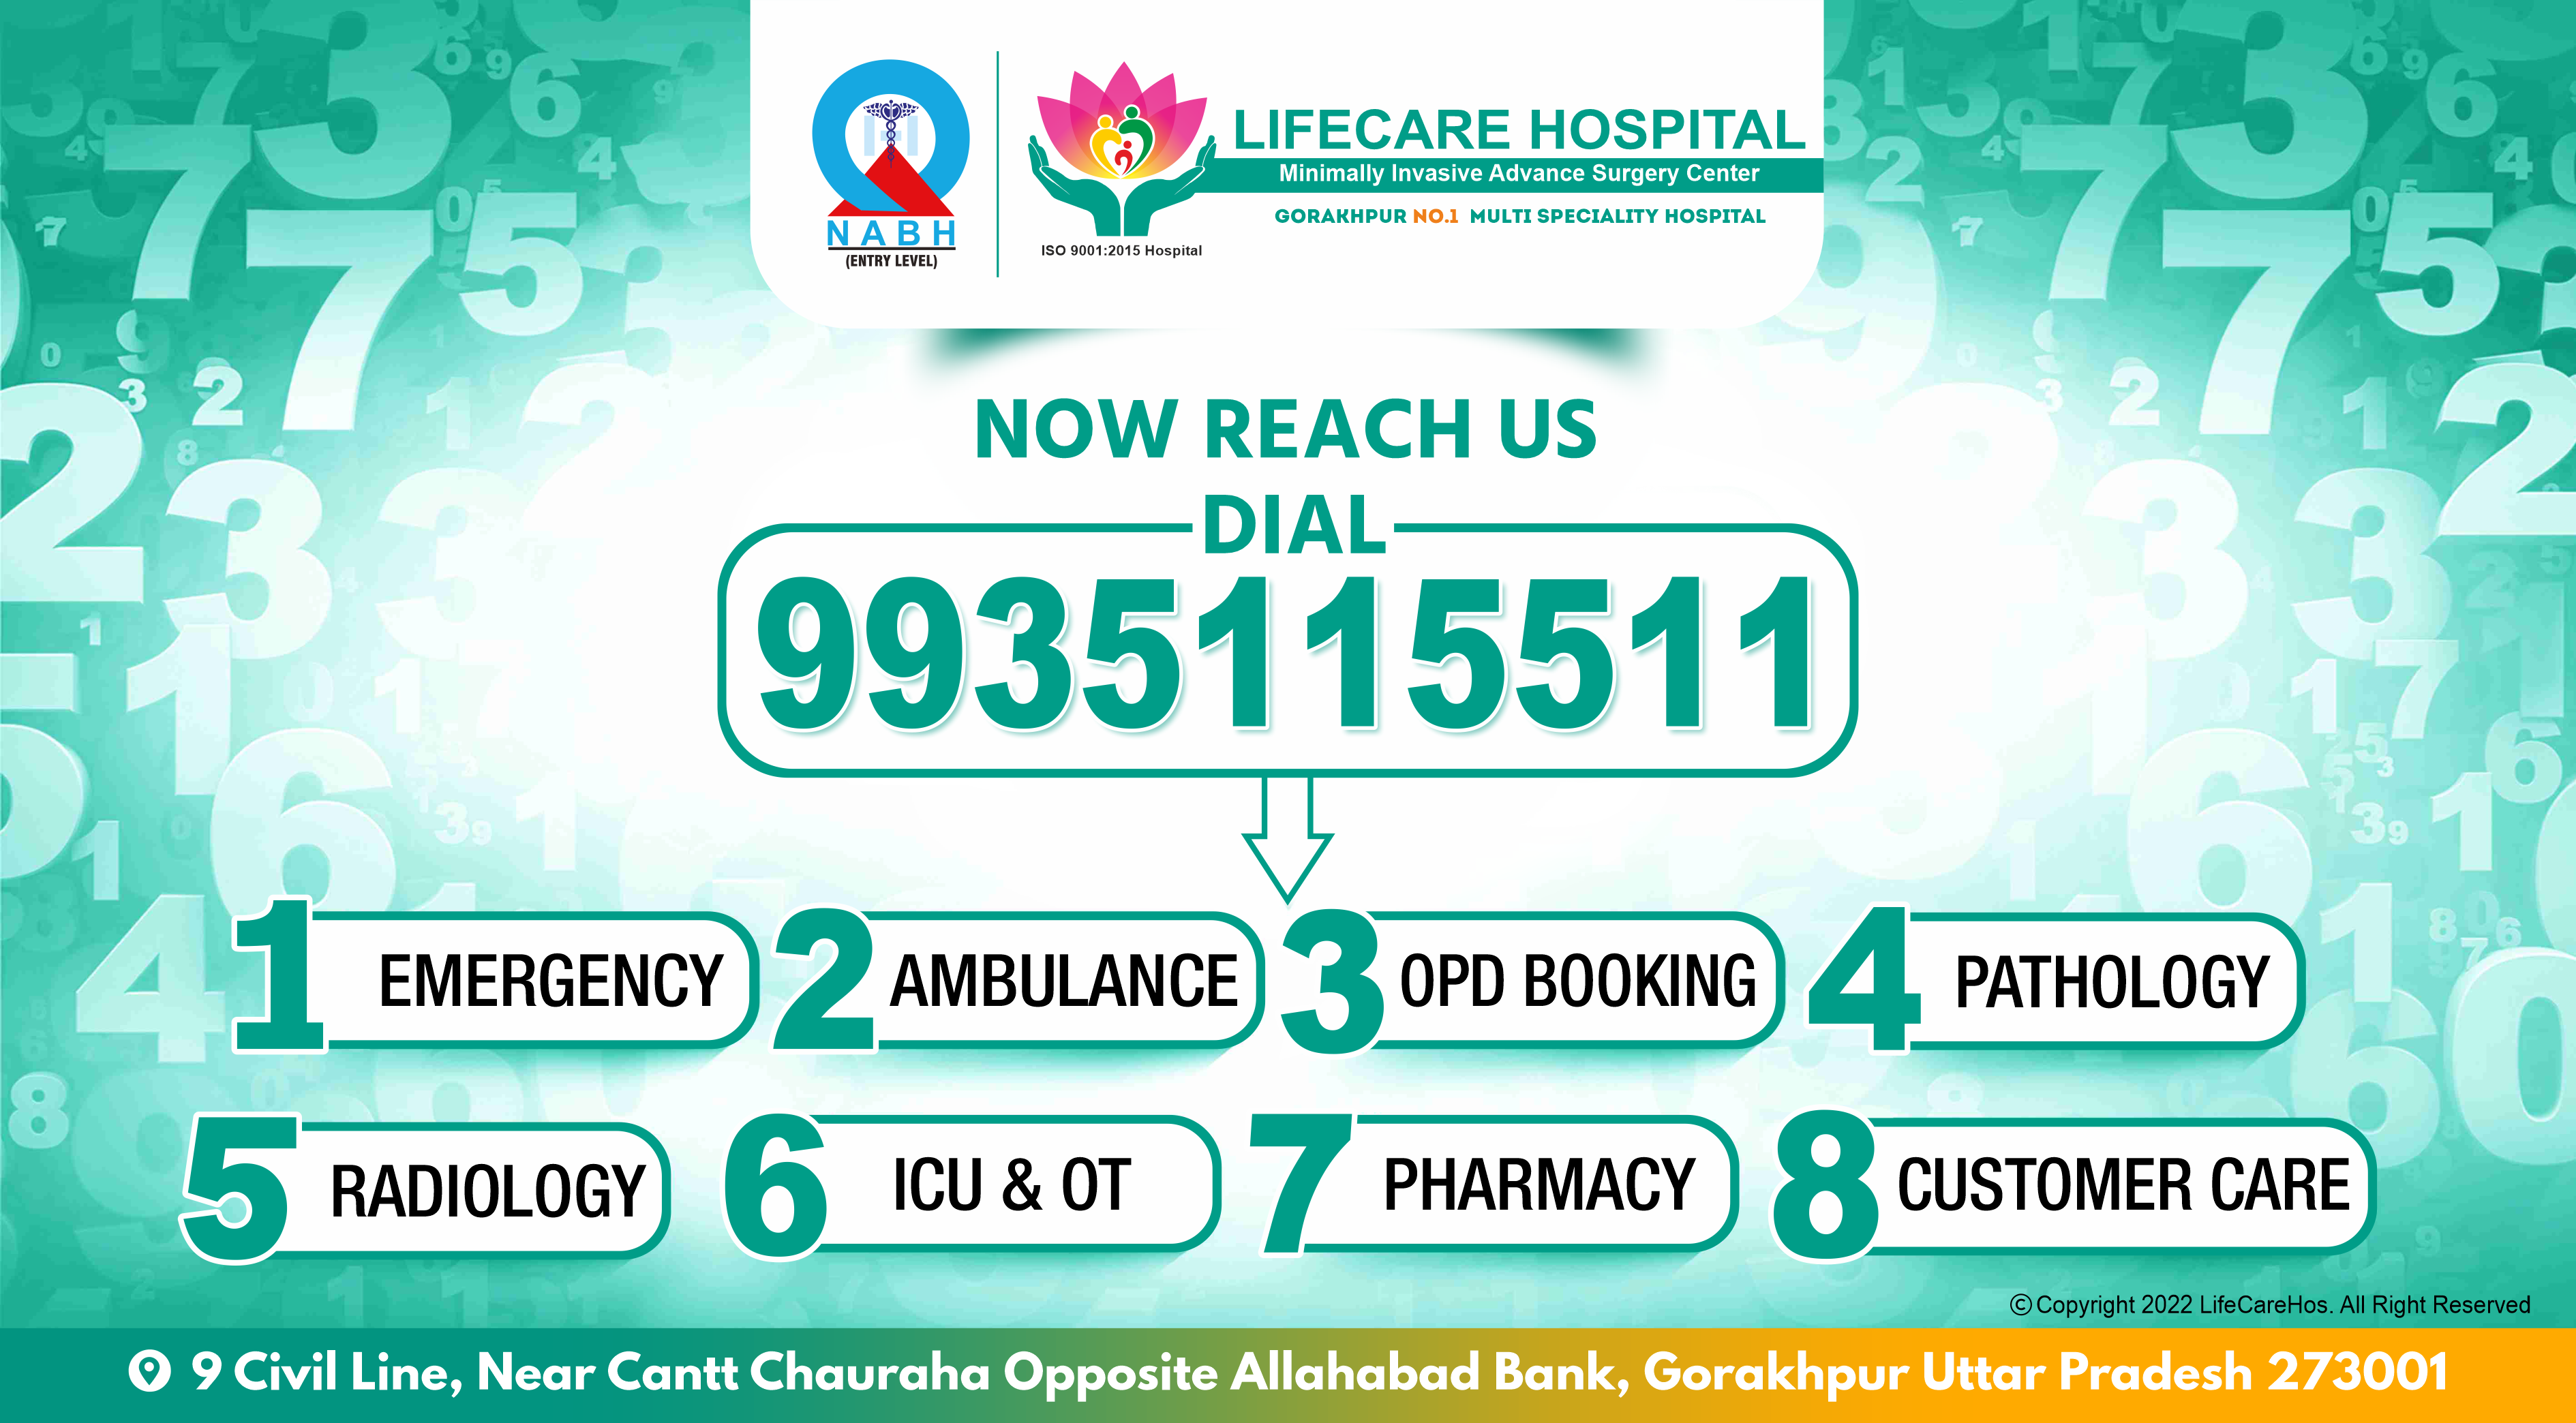 LIFECARE HOSPITAL Is Now NABH CERTIFIED (Entry Level) Hospital